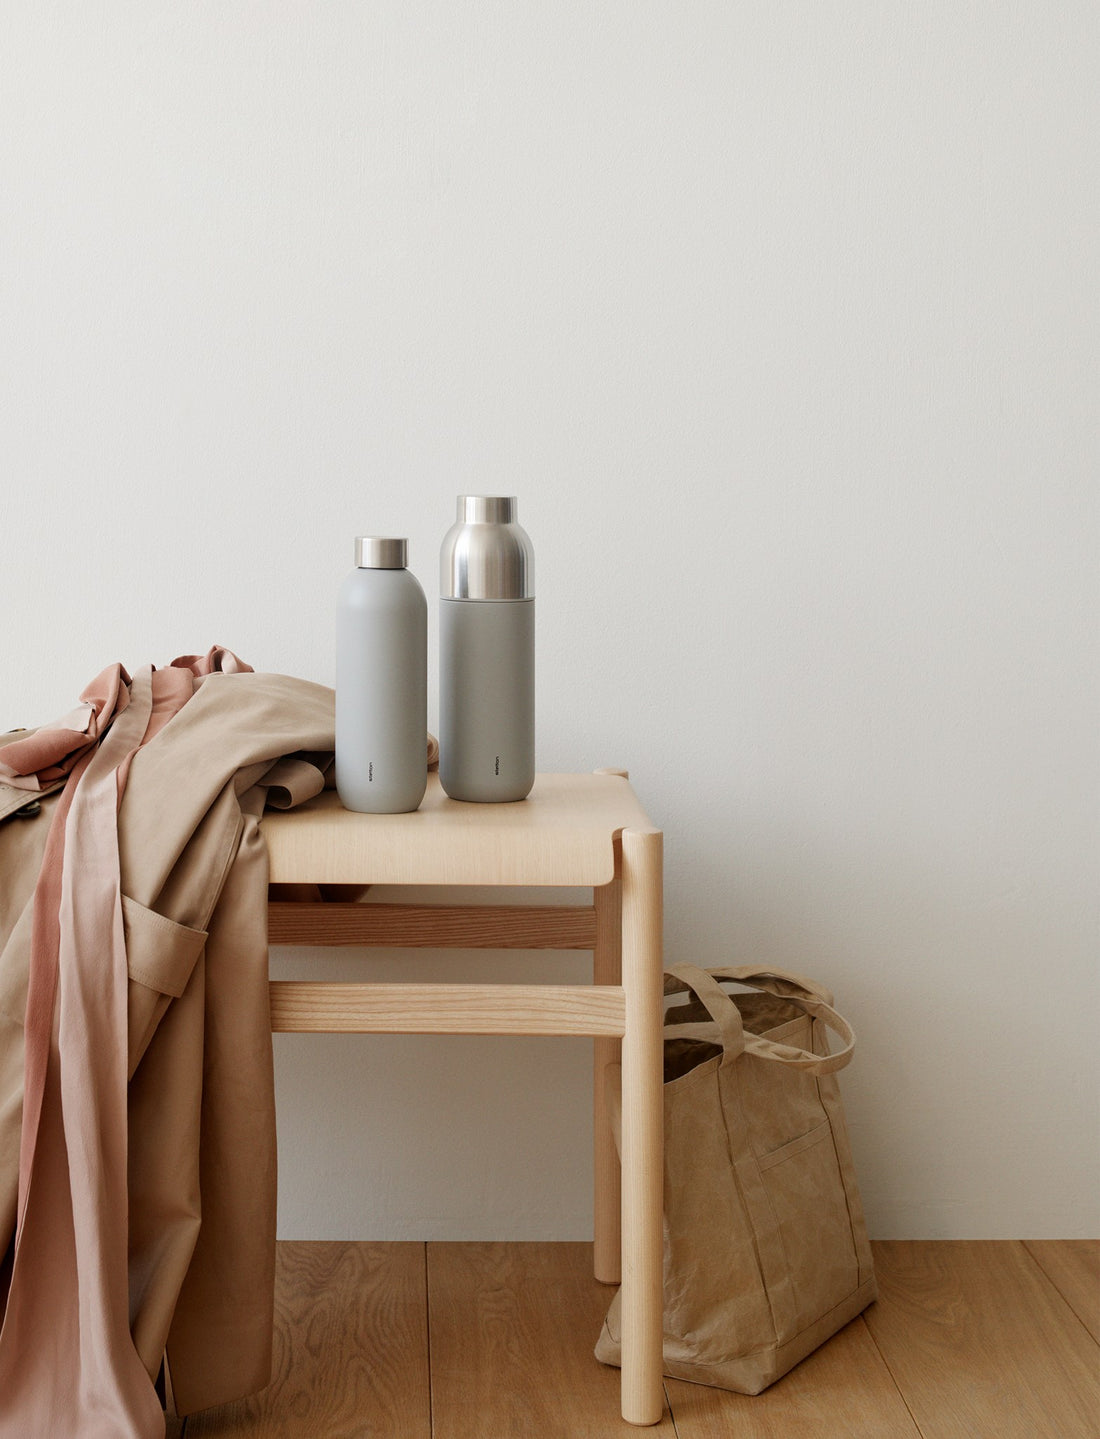 Keep Warm Thermo Bottle by Stelton